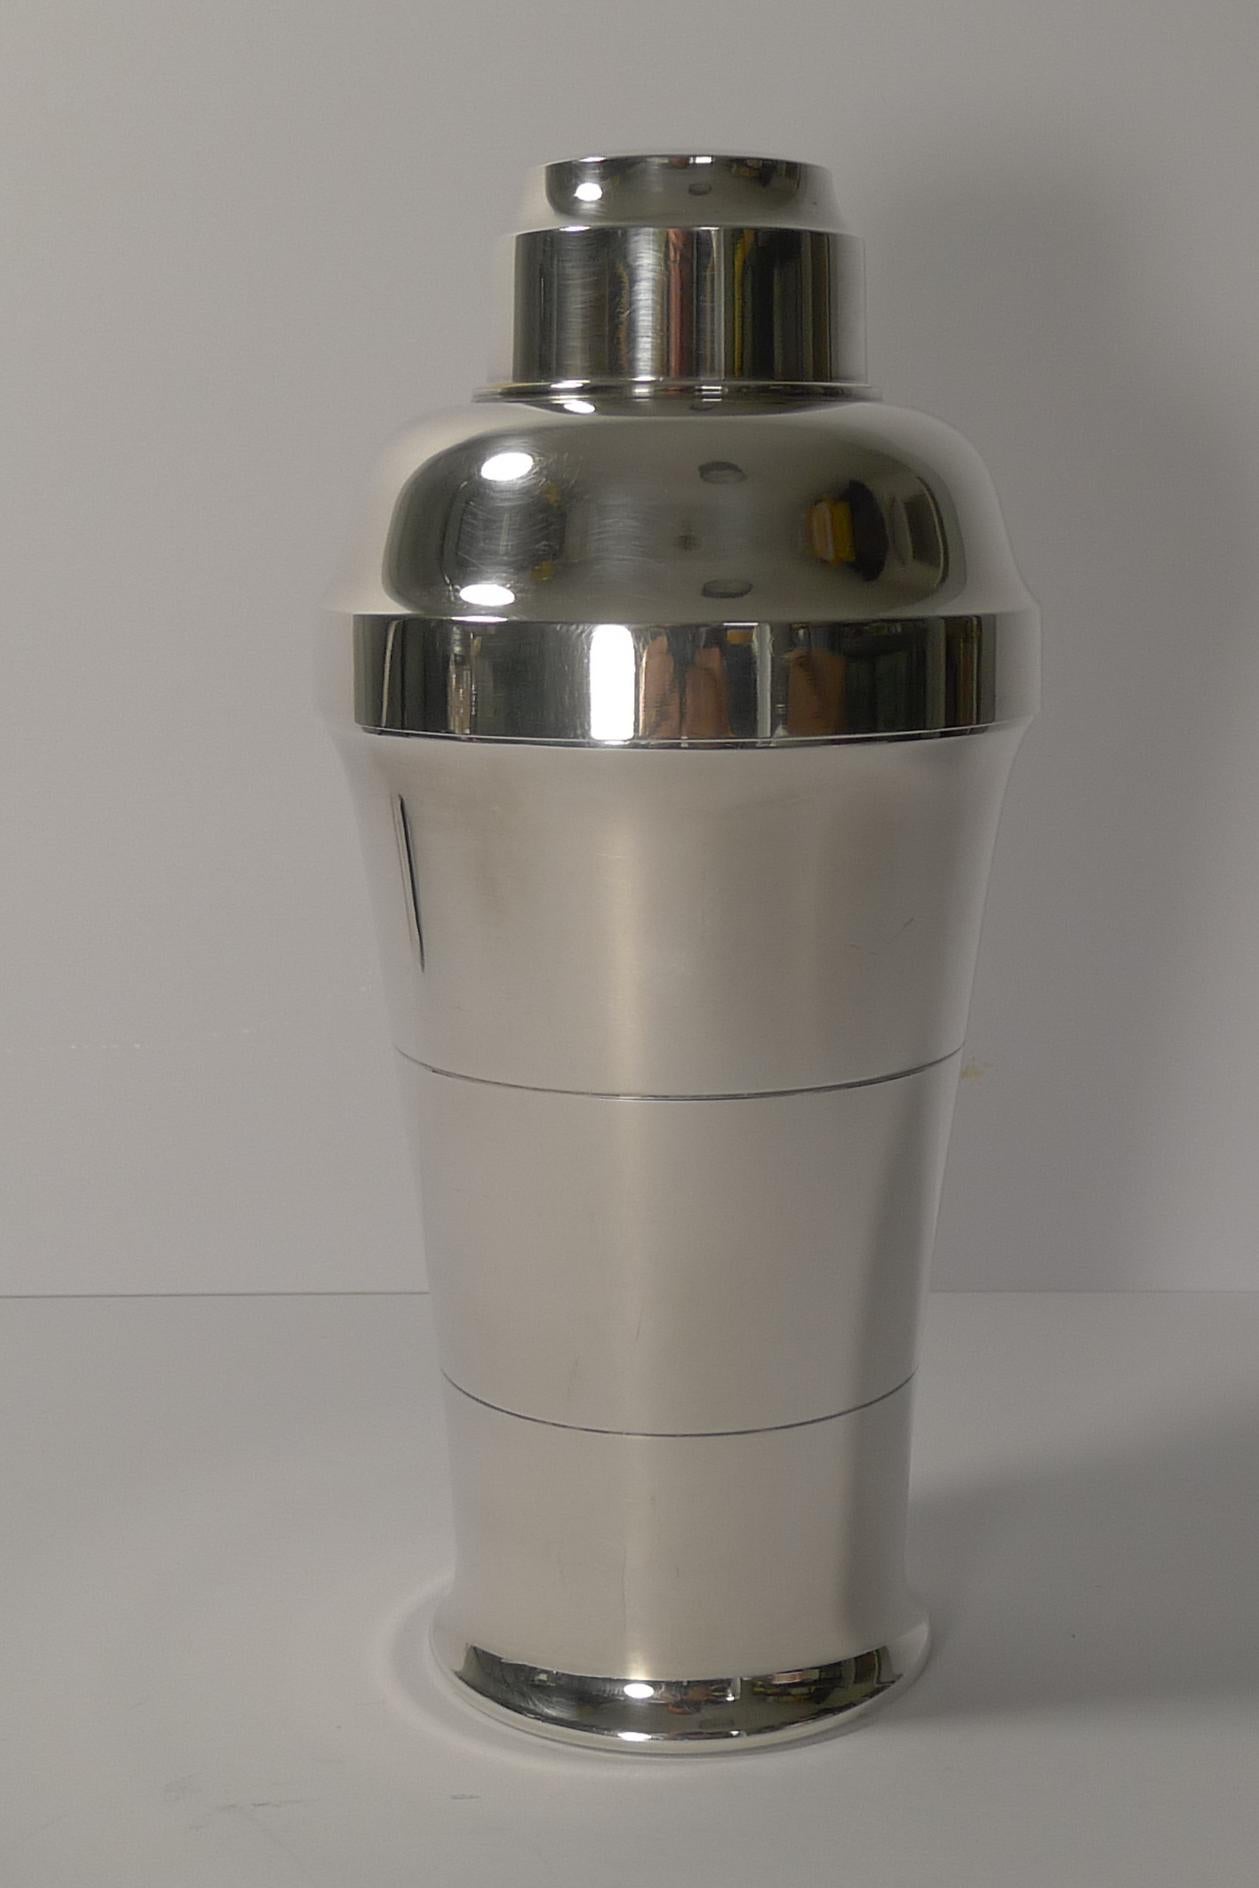 A fabulously shaped cocktail shaker made in France by the well renowned silversmith, St Médard, Paris, fully marked on the underside.

Art Deco in style and era, dating to the 1930s, the silver plate remains intact and in excellent condition with